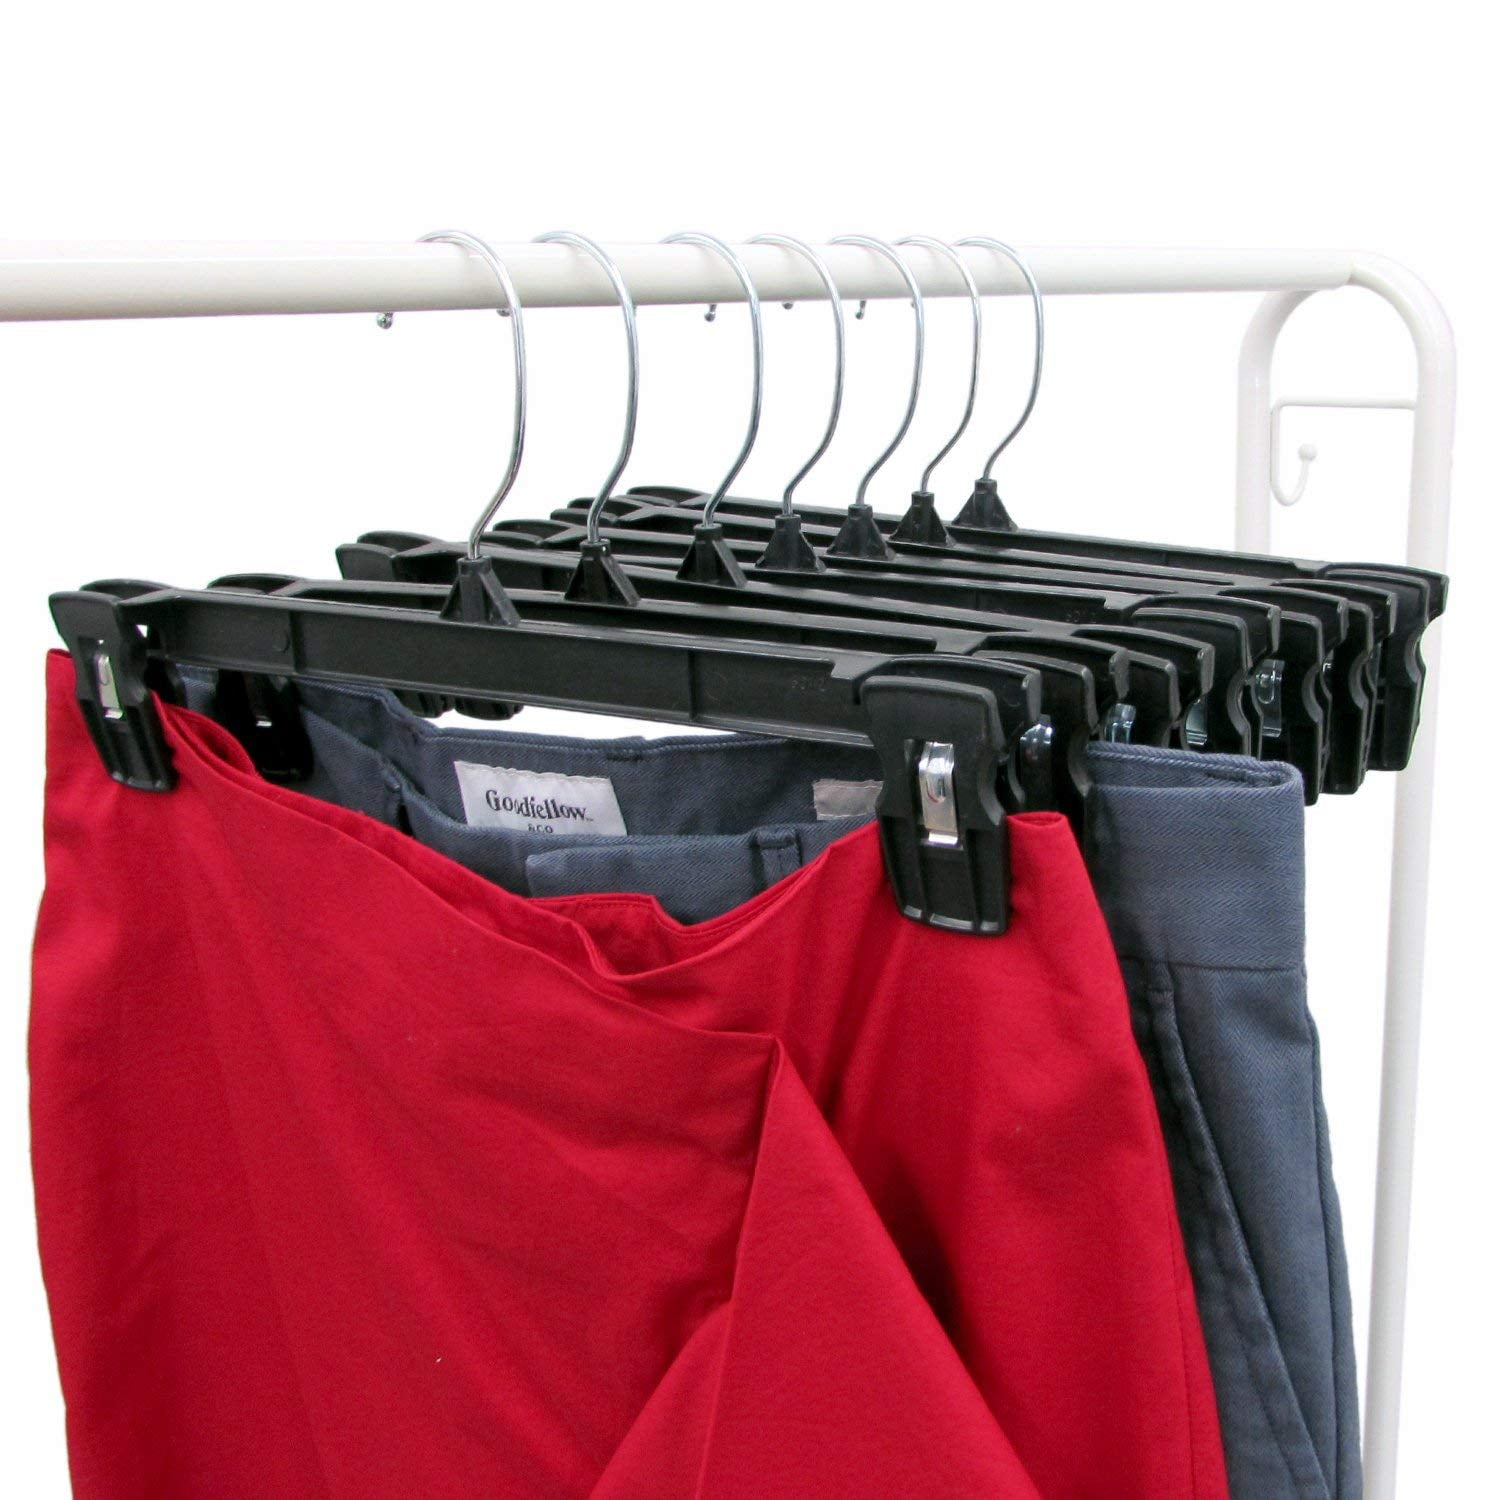 Kitcheniva Durable Trousers Skirts Hangers - Pack of 60, Pack of